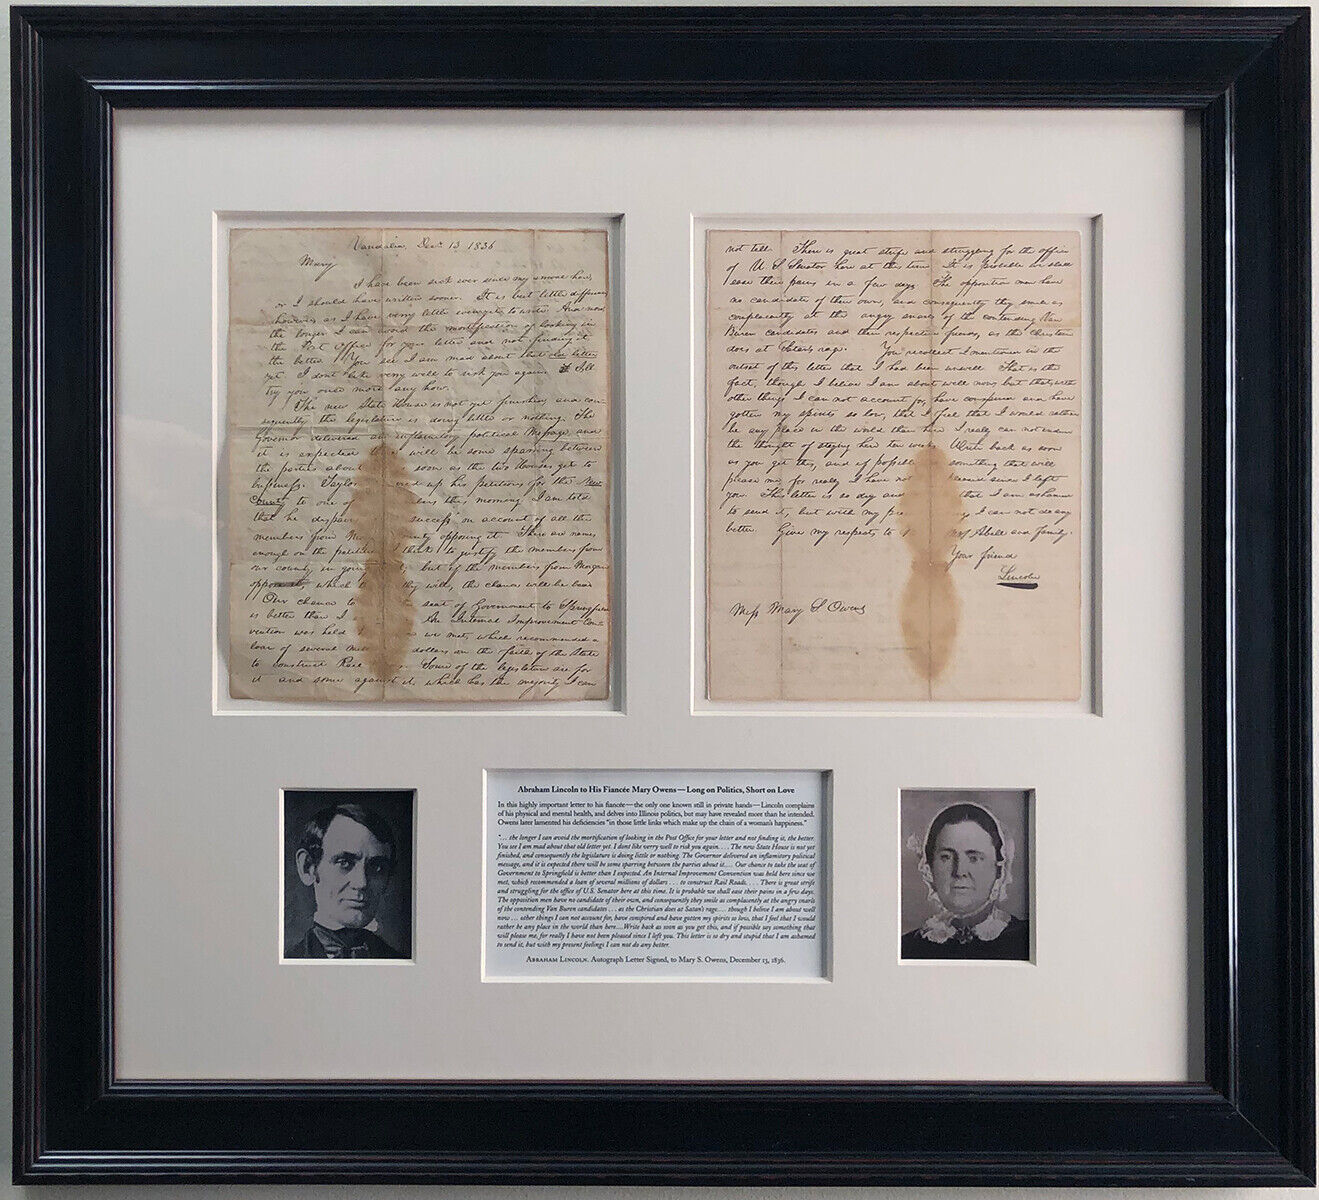 Abraham Lincoln Autograph Letter Signed to his Fiancée Mary Owens